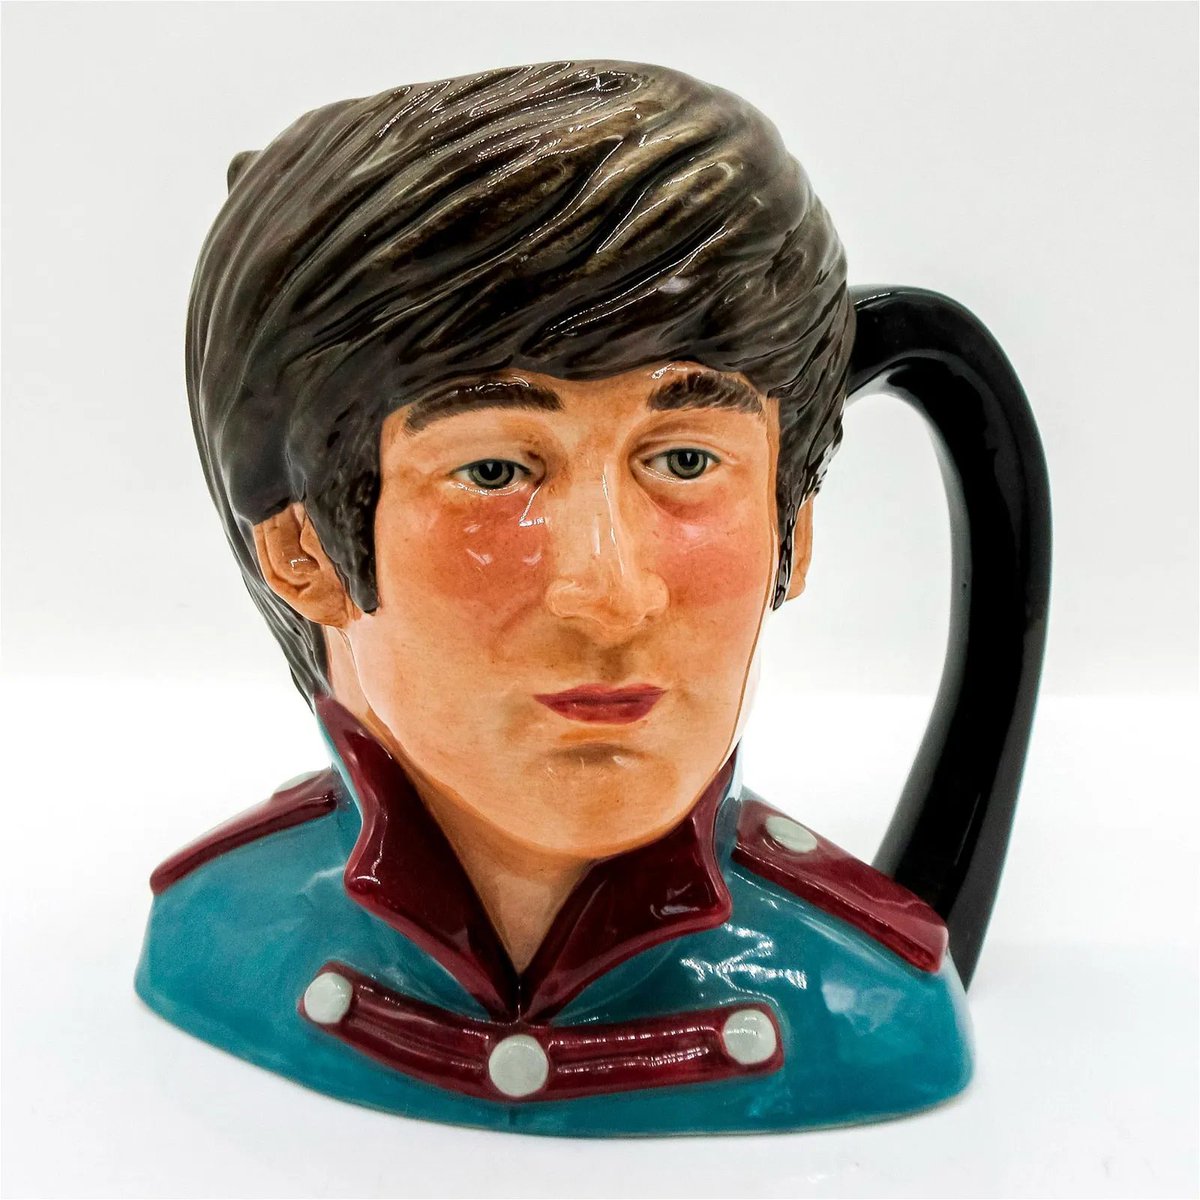 Babe what's wrong, you barely poured tea from your John Lennon dressed as Sgt Pepper Paul McCartney jug today